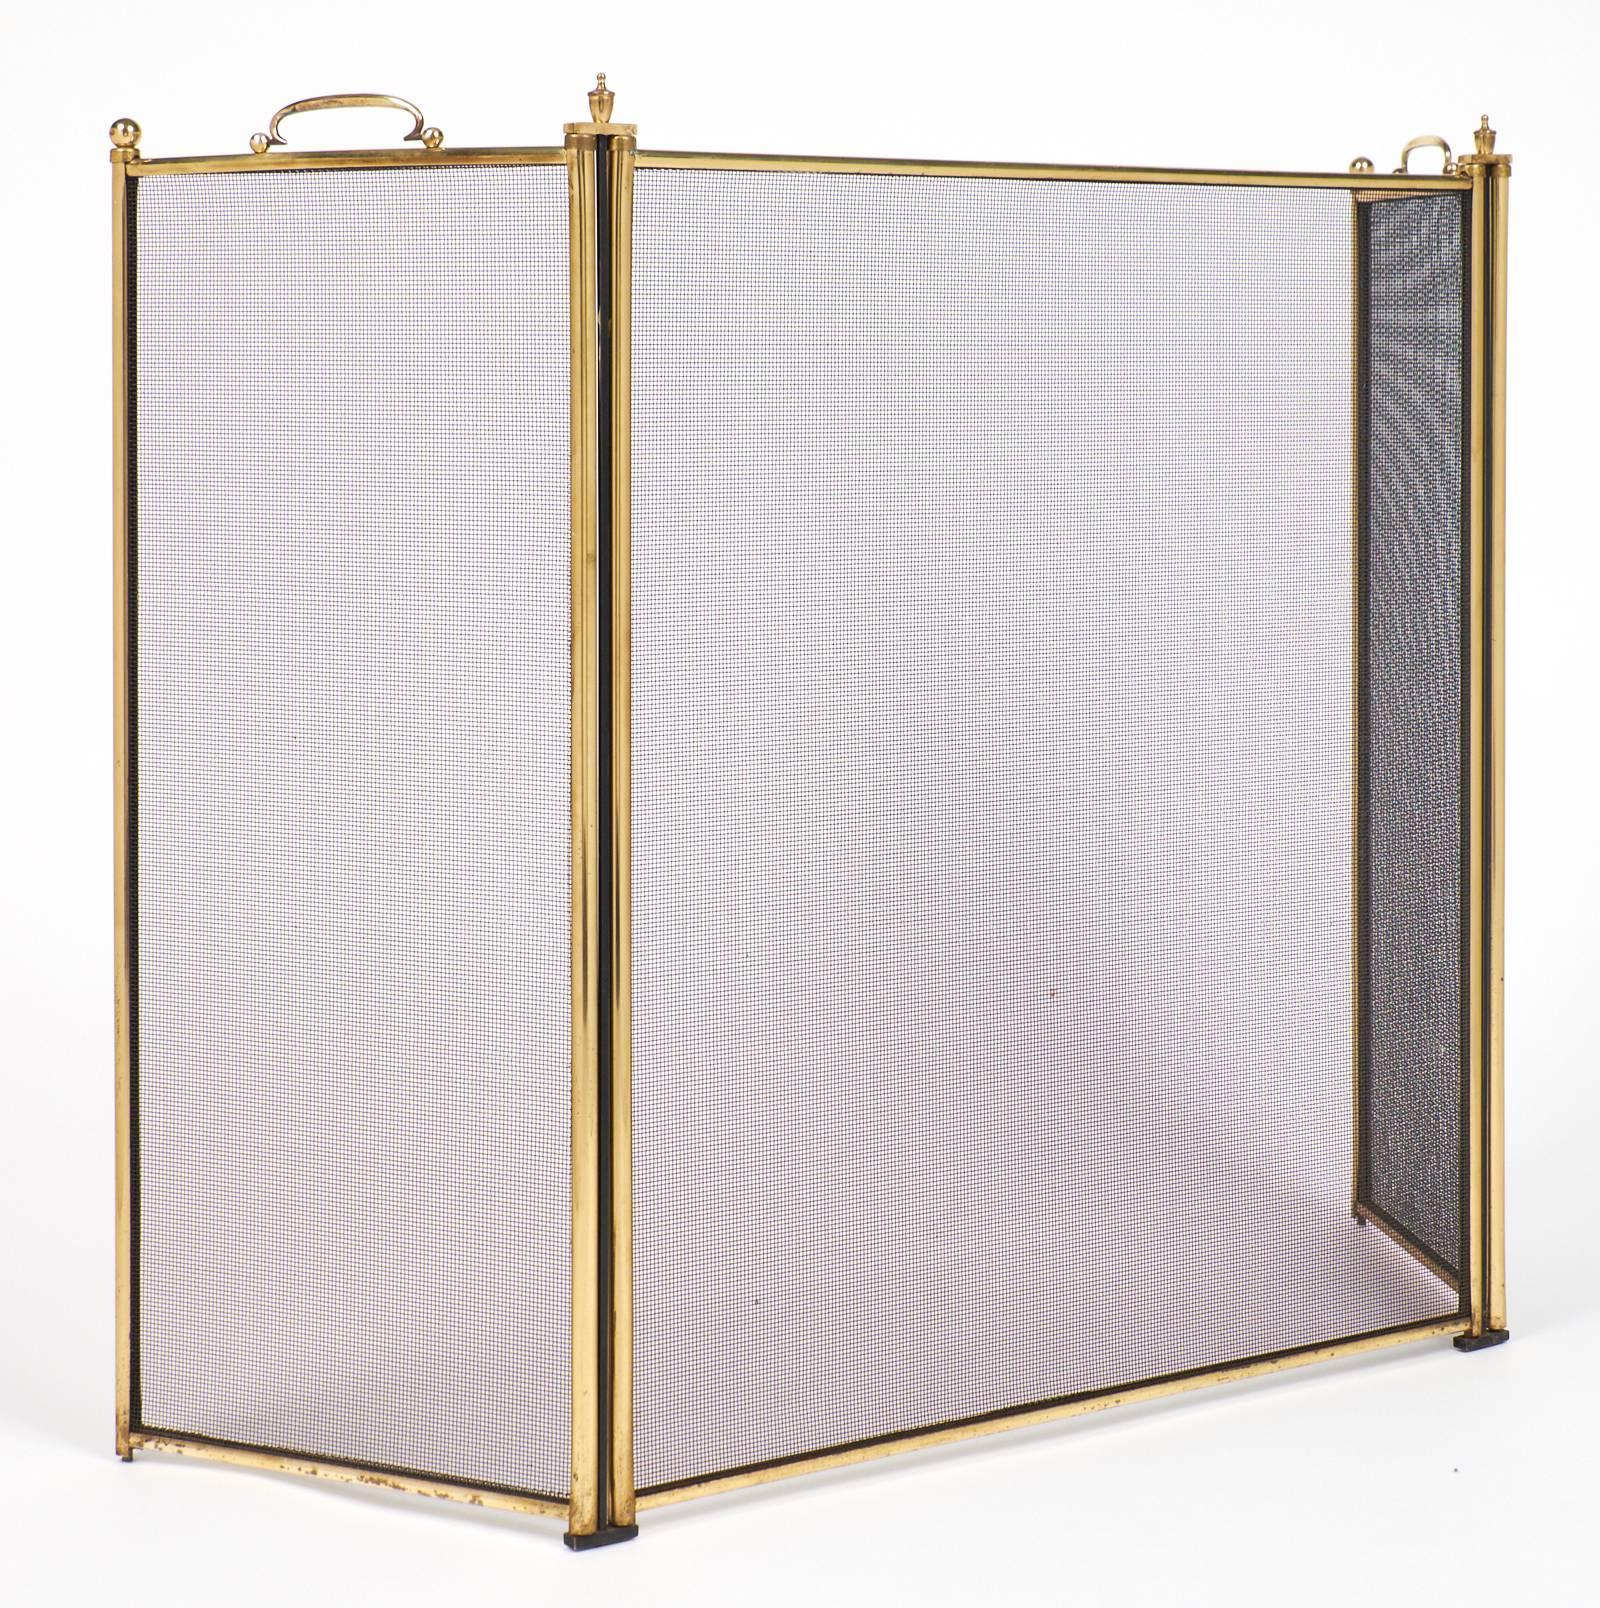 French brass fire screen with three mesh panels on hinges. A handle on each side panel provides easy maneuverability.